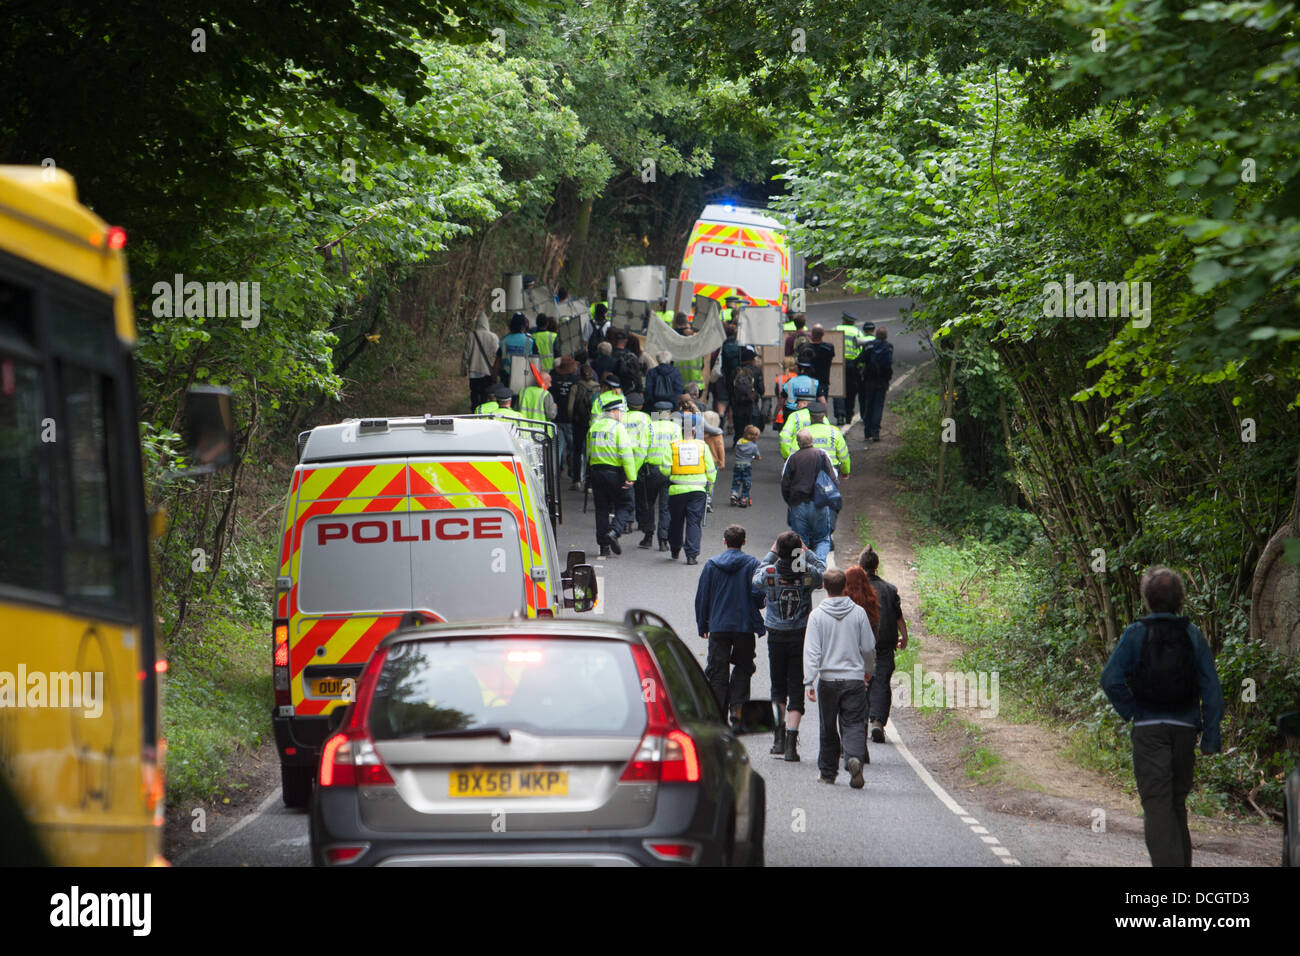 Balcombe, West Sussex, UK. 17th Aug, 2013. Protesters against Cuadrilla drilling & fracking just outside the village of Balcombe are escorted by police towards the protest site on the London Road. Credit:  martyn wheatley/Alamy Live News Stock Photo